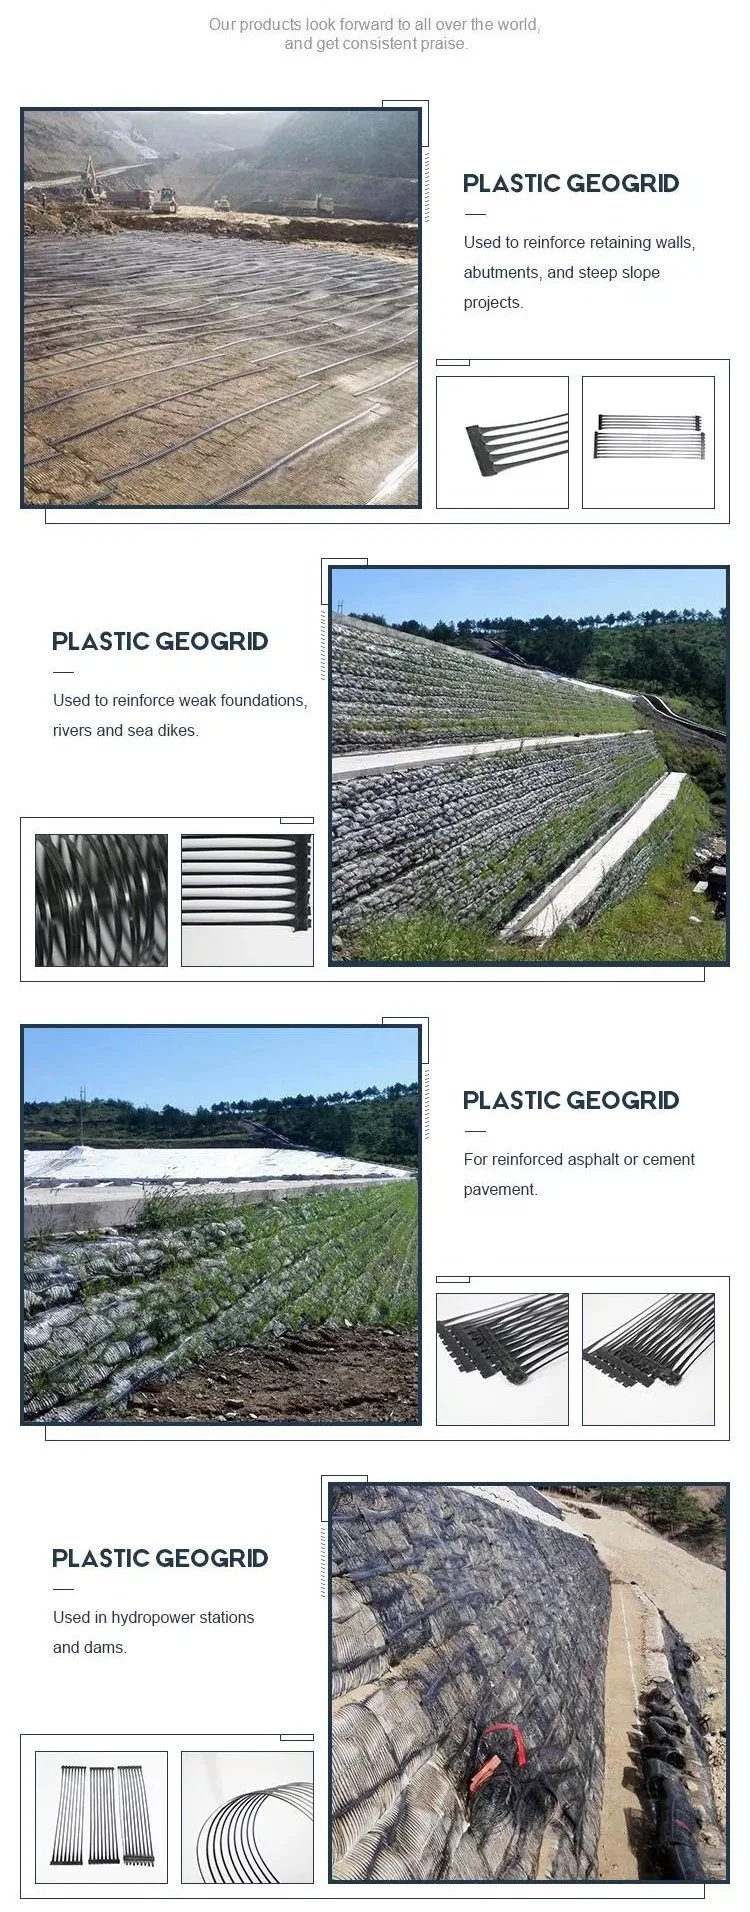 Uniaxial Ux PP Polypropylene / HDPE Plastic Geogrid for Subgrade Railway Retaining Wall